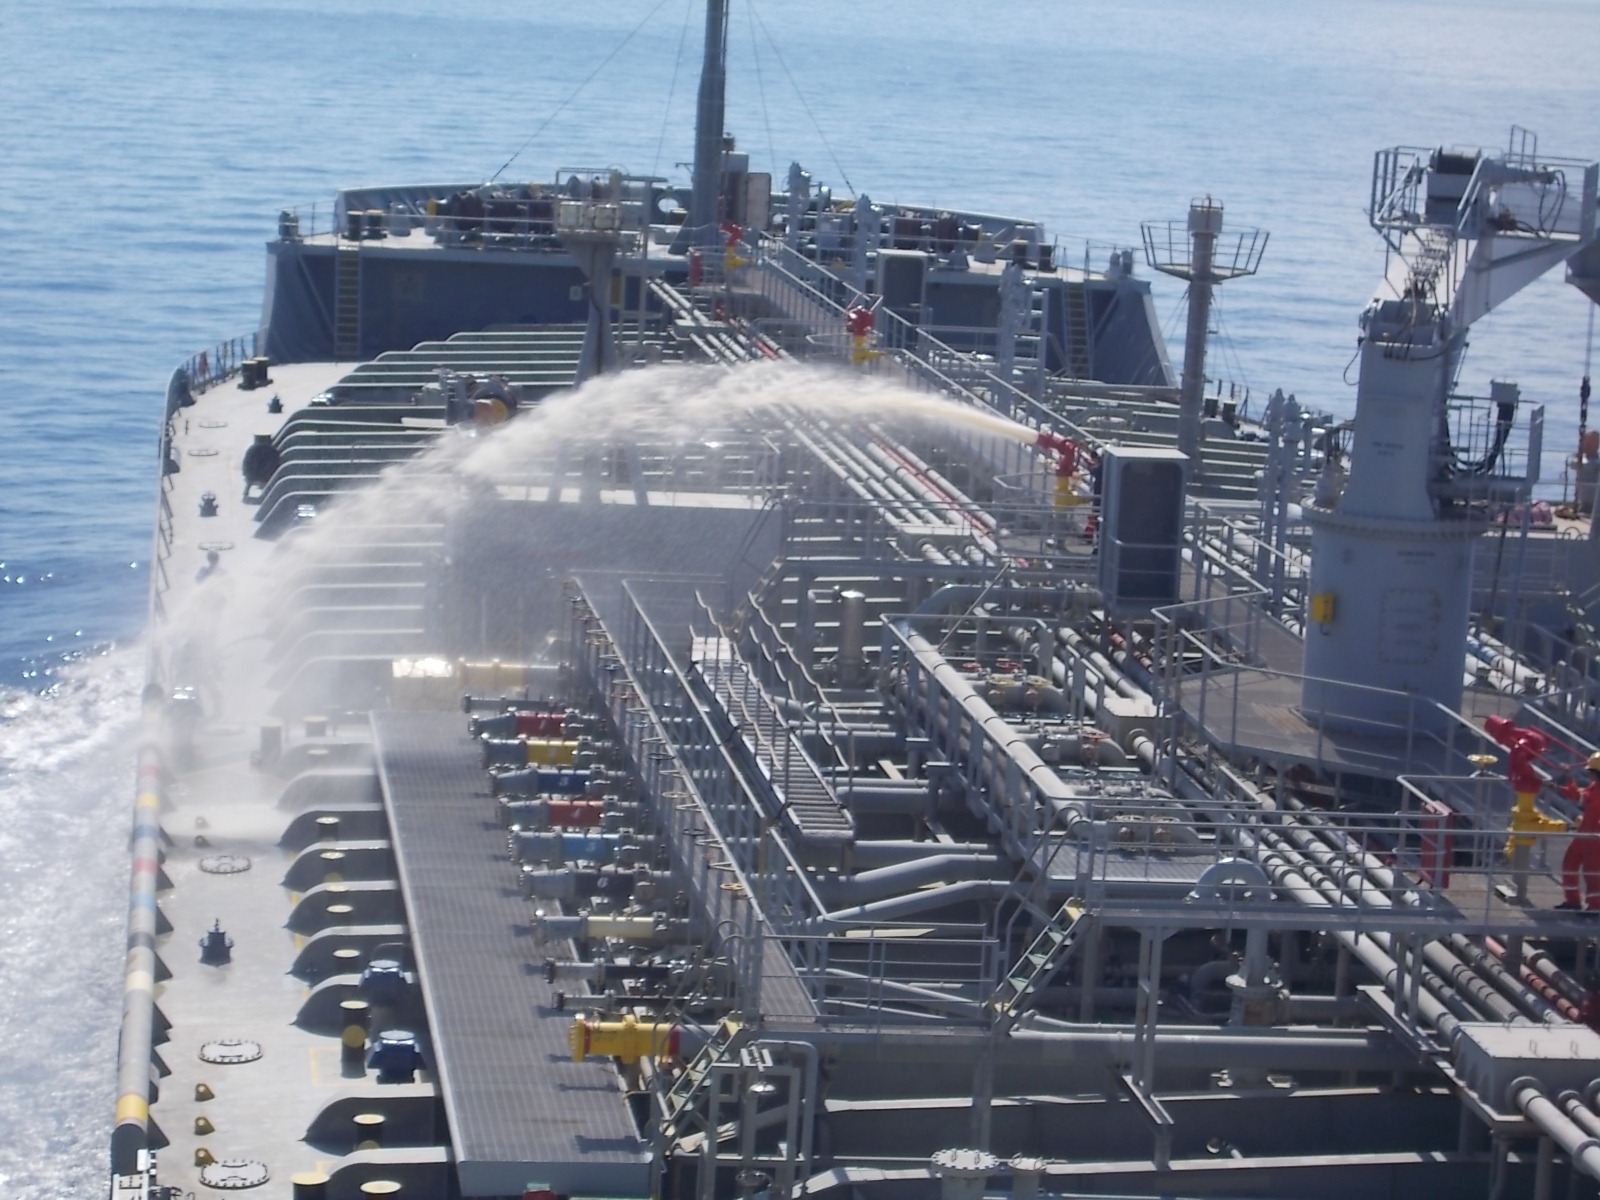 A tanker vessel opening her deck monitor where water is coming out as part of their fire drill.